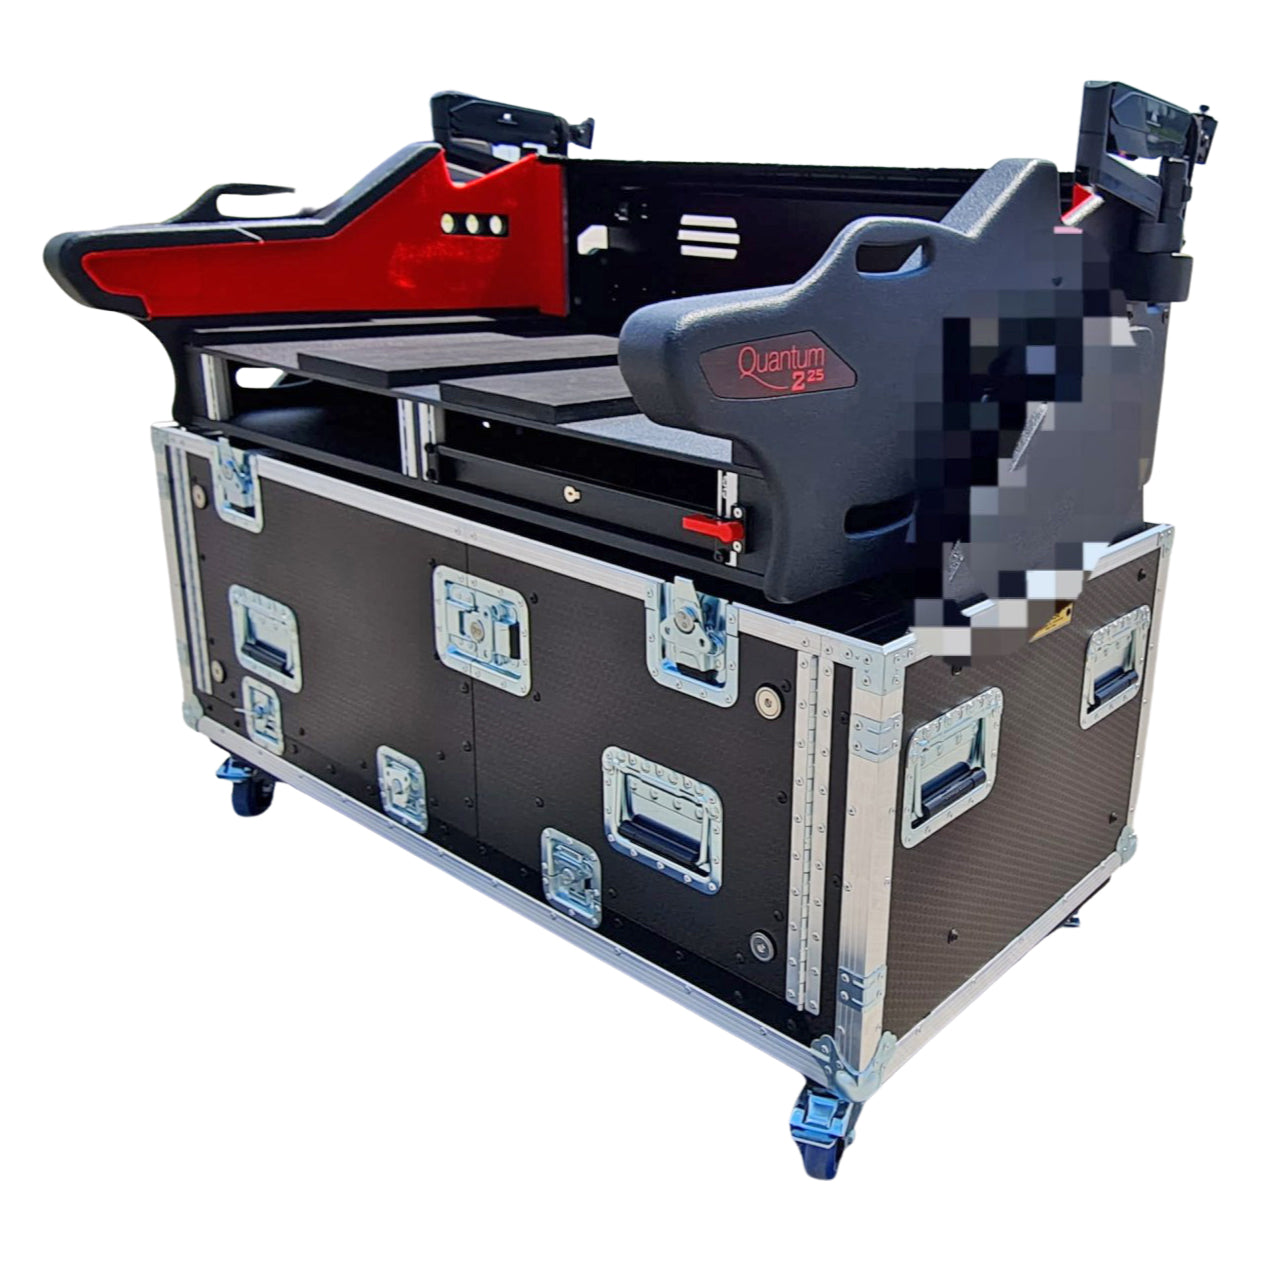 Pro X For Soundcraft VI7000 Flip-Ready Hydraulic Console Easy Retracting Lifting Case with 2x 2U Rack Space by ZCASE XZF-SCVI7000D2X2U